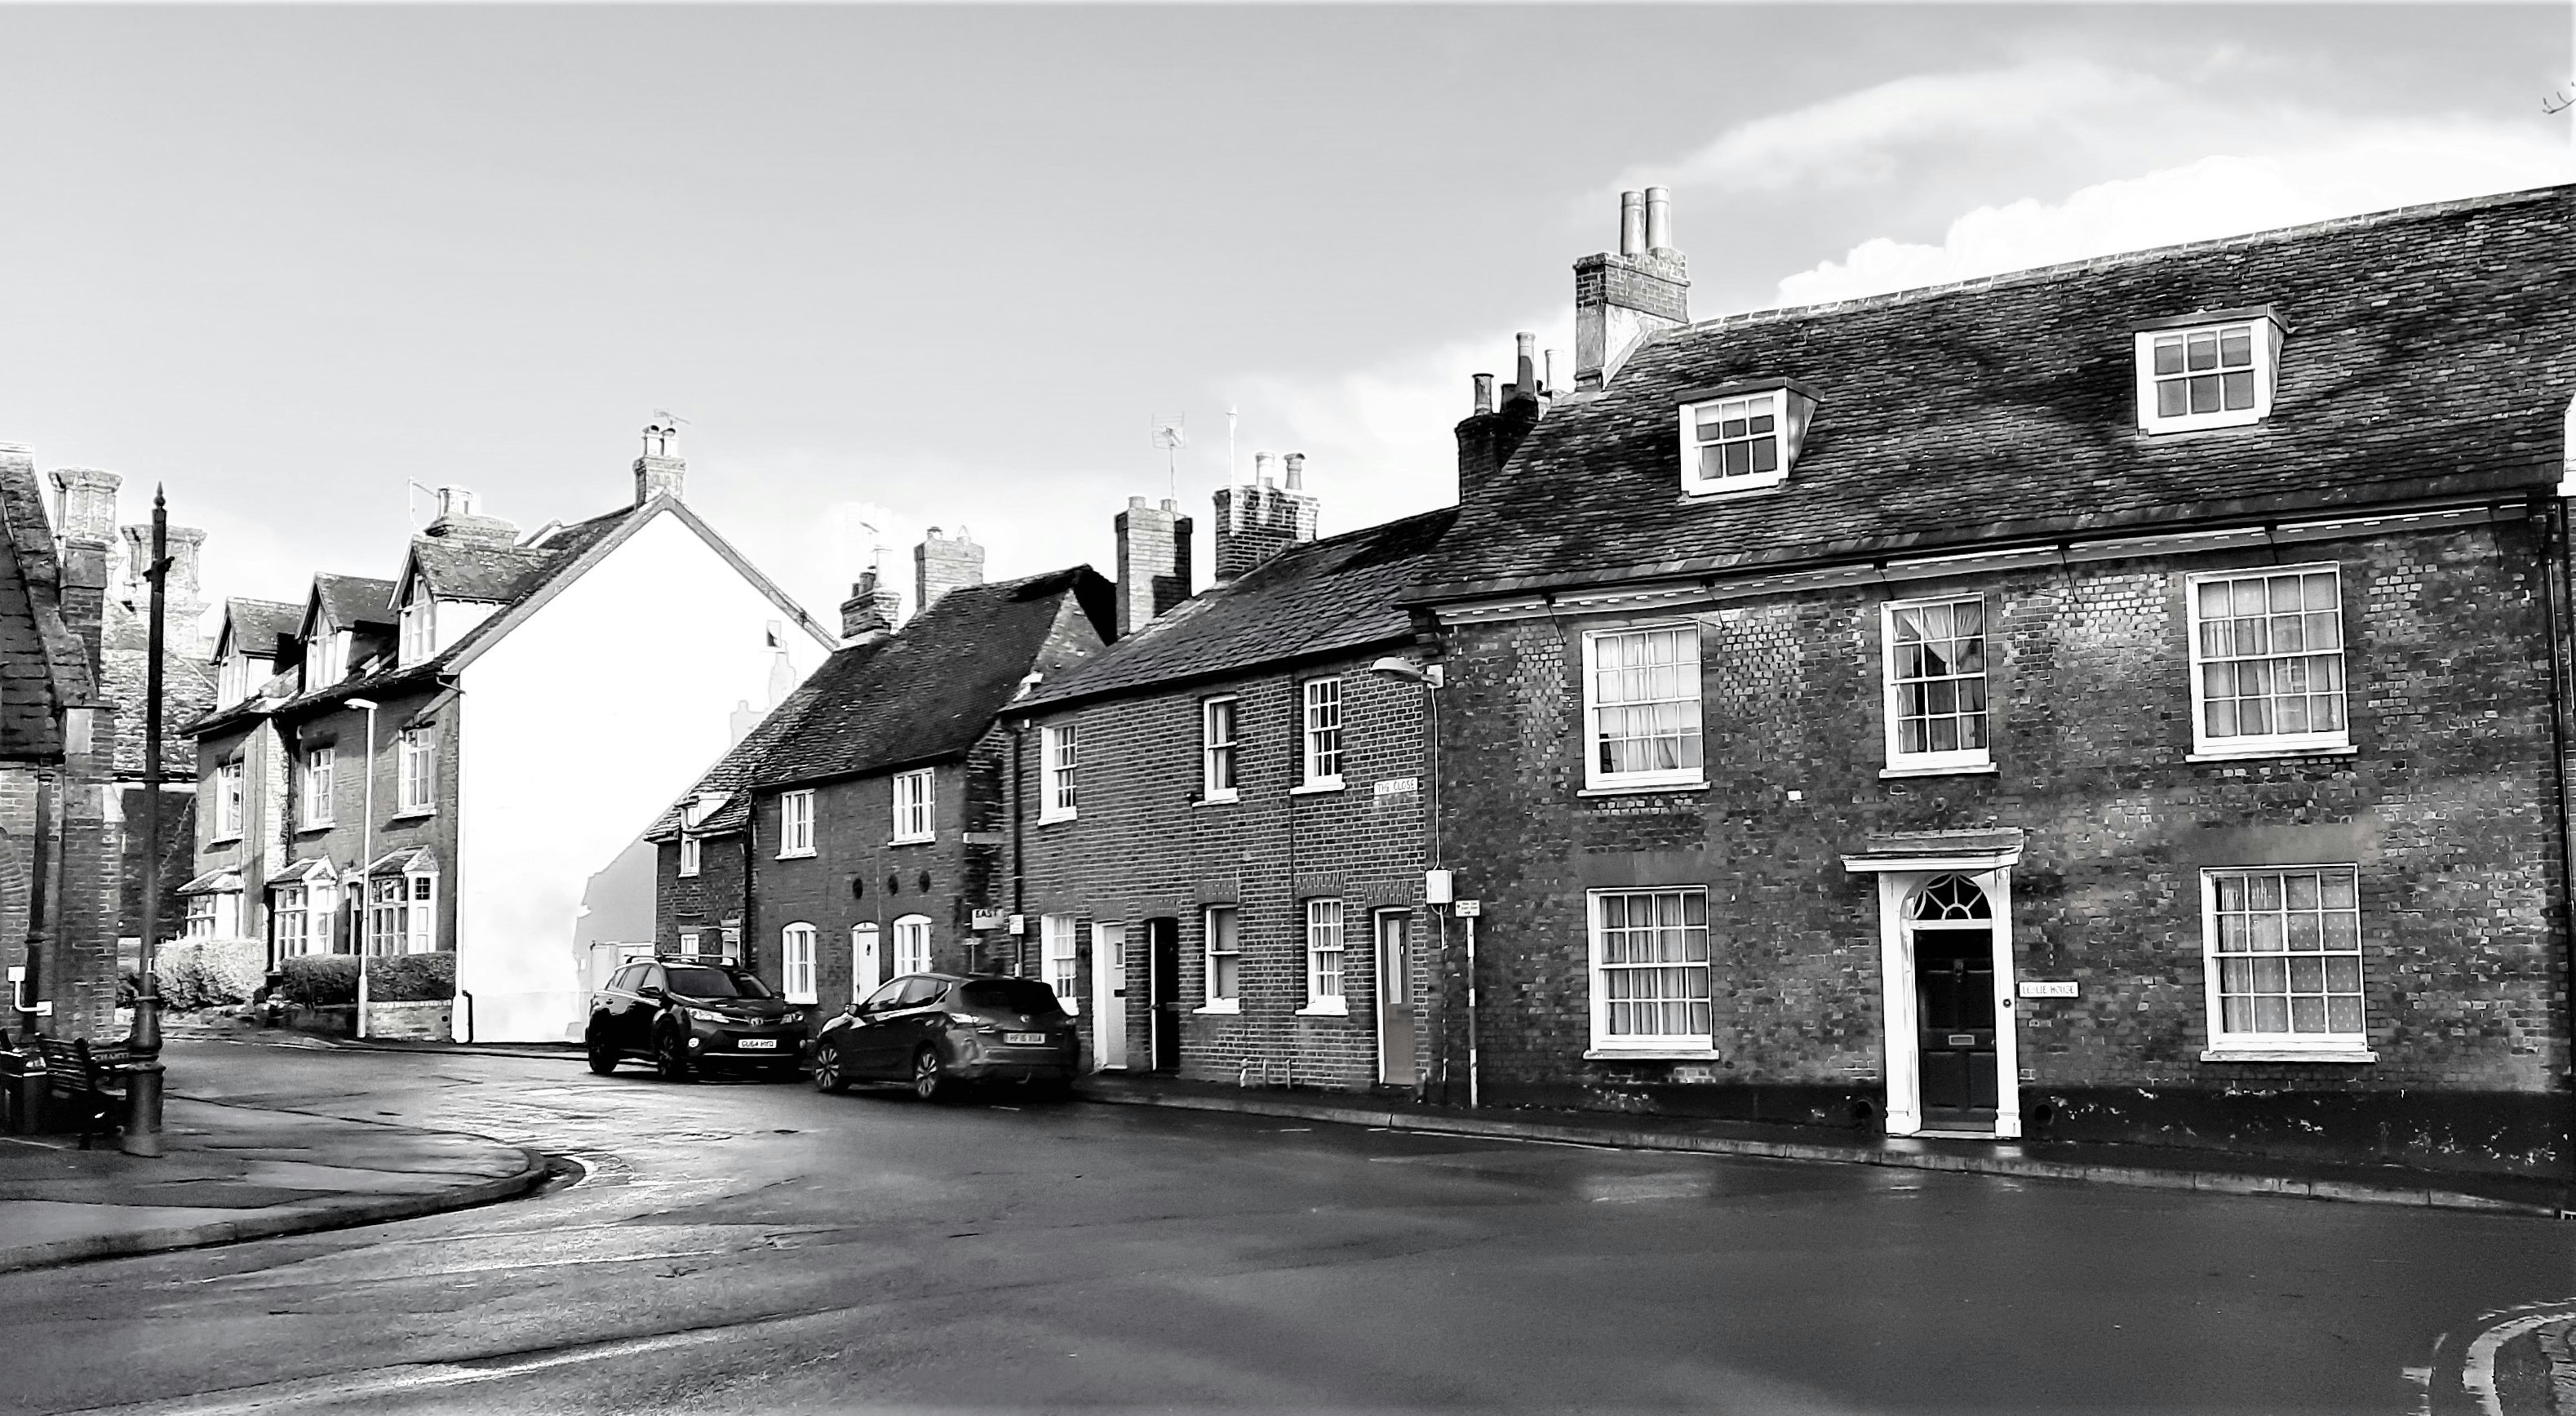 A small row of houses in Blandford Forum constructed after the last great fire with traditional Georgian architecture featuring red brick façades, construction est. 18th century. Image Captured 2021. 